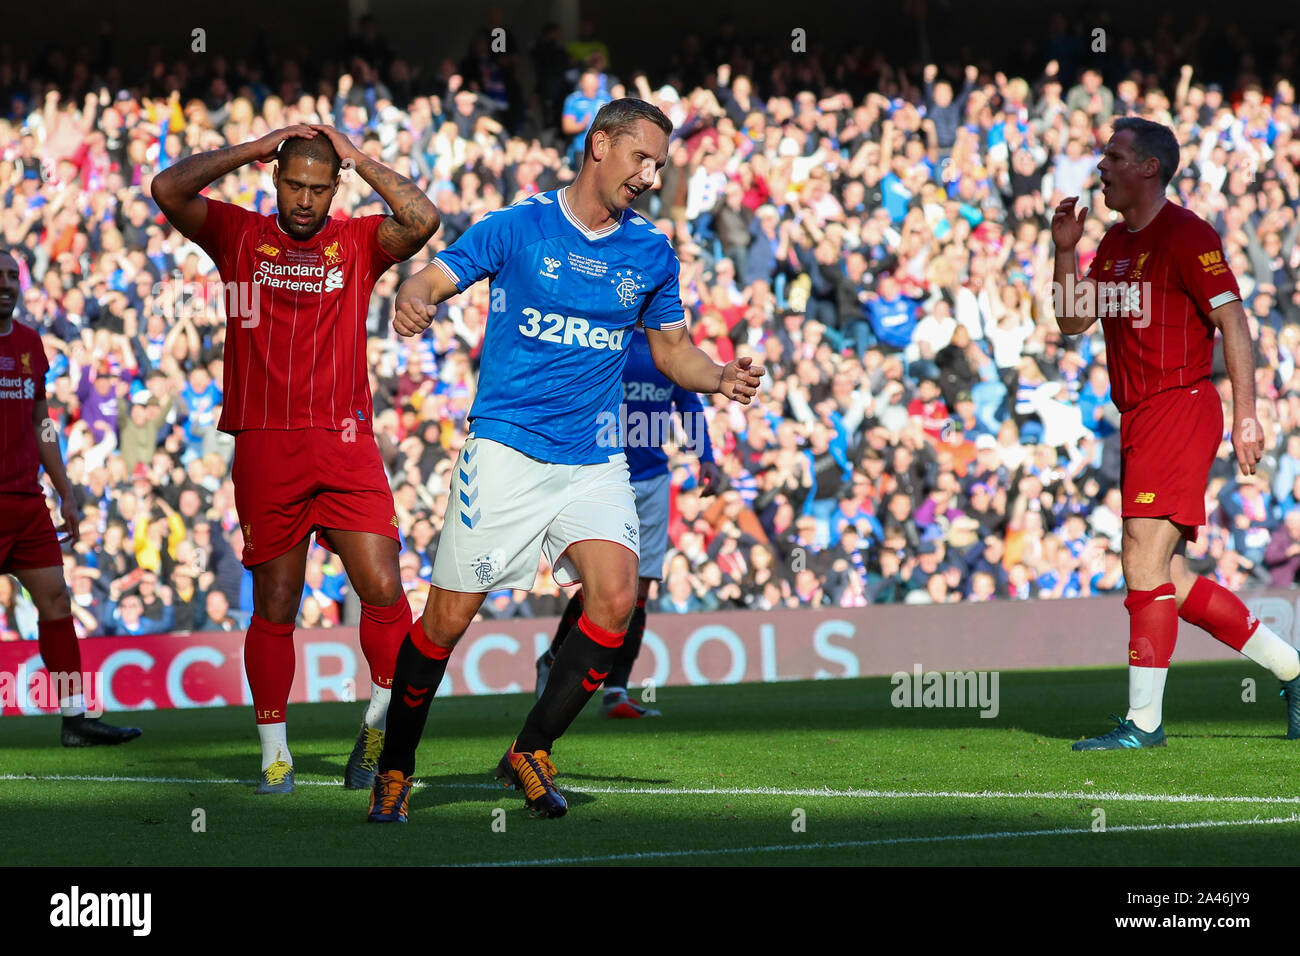 12 October 2019, Ibrox Stadium, Glasgow,  UK. Ibrox football stadium, the home of Glasgow Rangers football club hosted a match between Rangers Legends (retired and ex-players) versus Liverpool Legends (retired and ex-players) with ALEX McLEISH (ex Scotland manager) as the manger of Rangers and IAN RUSH MBE (former Liverpool forward) as the manager of Liverpool. STEVEN GERRARD, who has played for Liverpool and is the current manager of Rangers will be playing for both teams at some time during the match. Lovenkrands celebrating after scoring a goal. Credit: Findlay / Alamy News Stock Photo